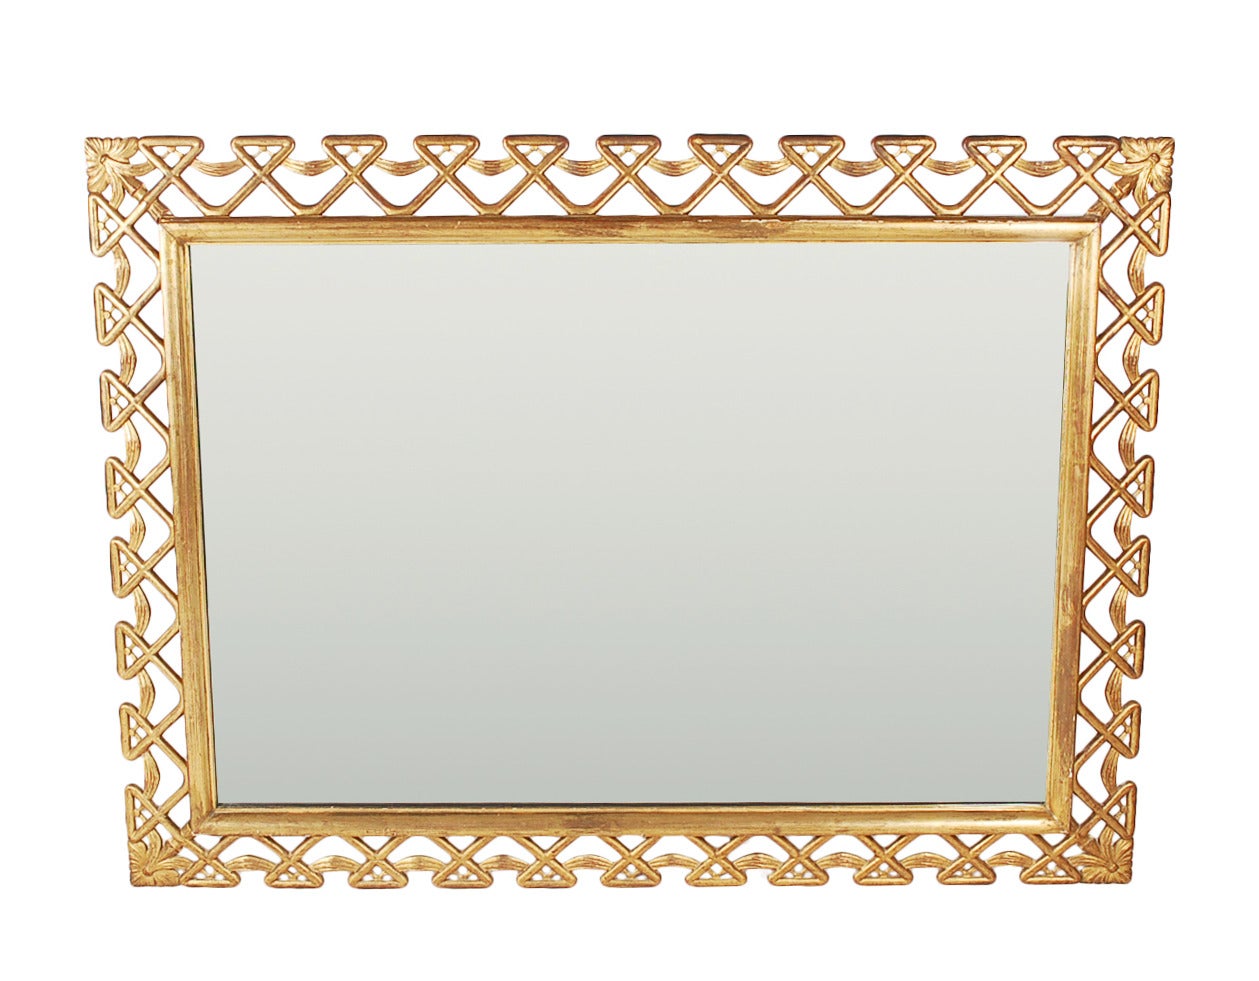 A strikingly glamorous Hollywood regency framed wall mirror that will add class to any room. It features an intricate gold gilded wood frame and nice size original mirror.